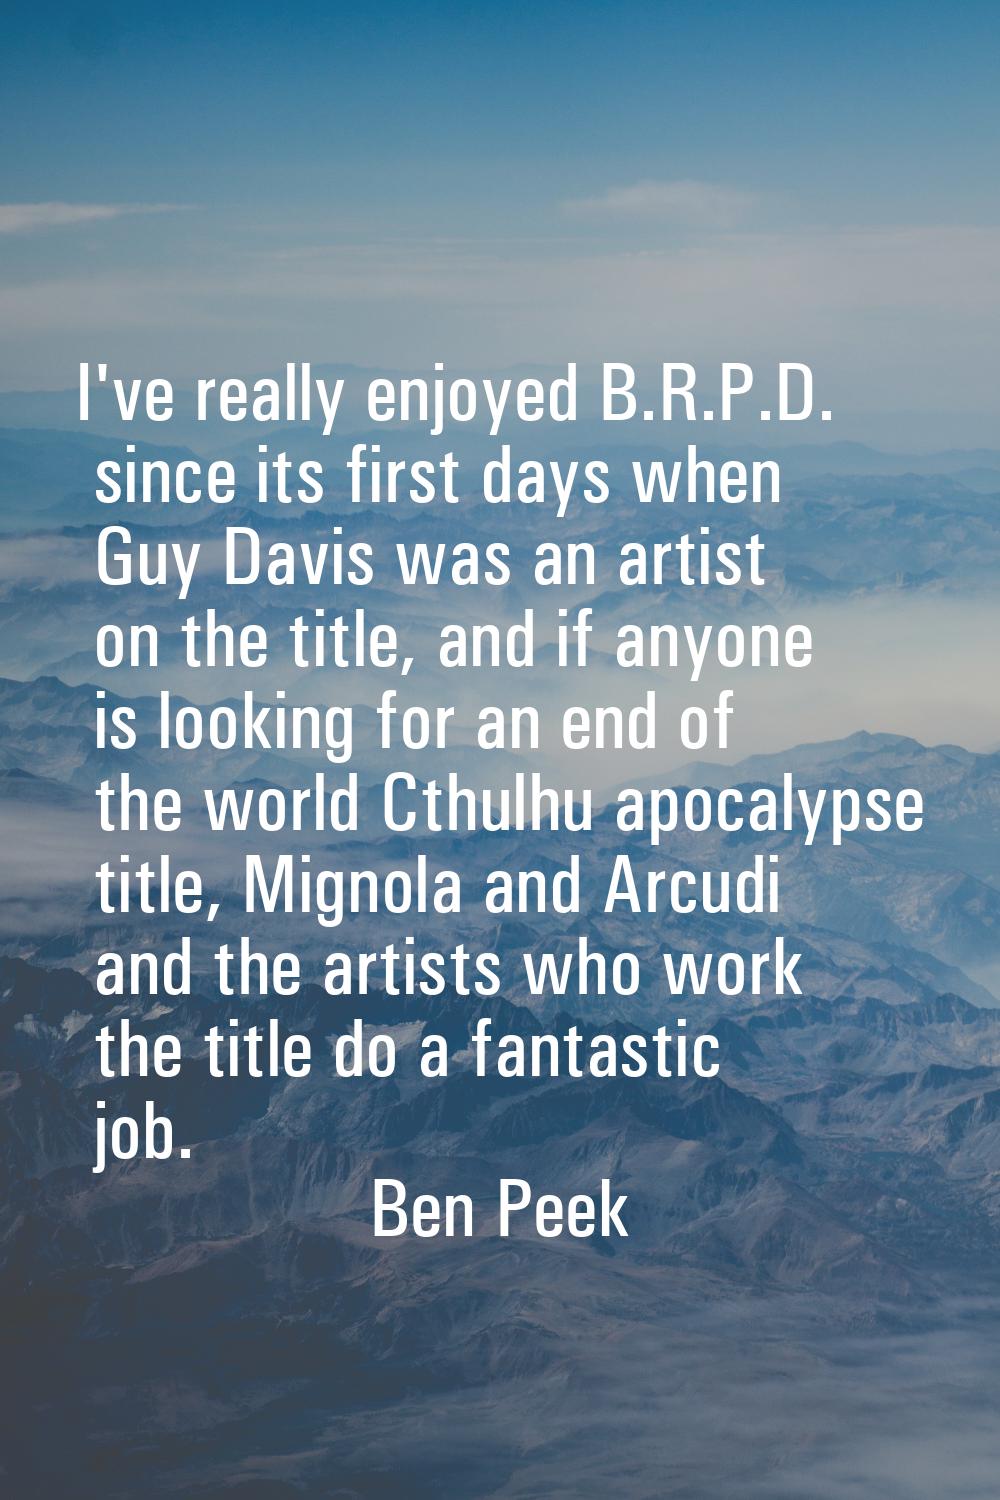 I've really enjoyed B.R.P.D. since its first days when Guy Davis was an artist on the title, and if